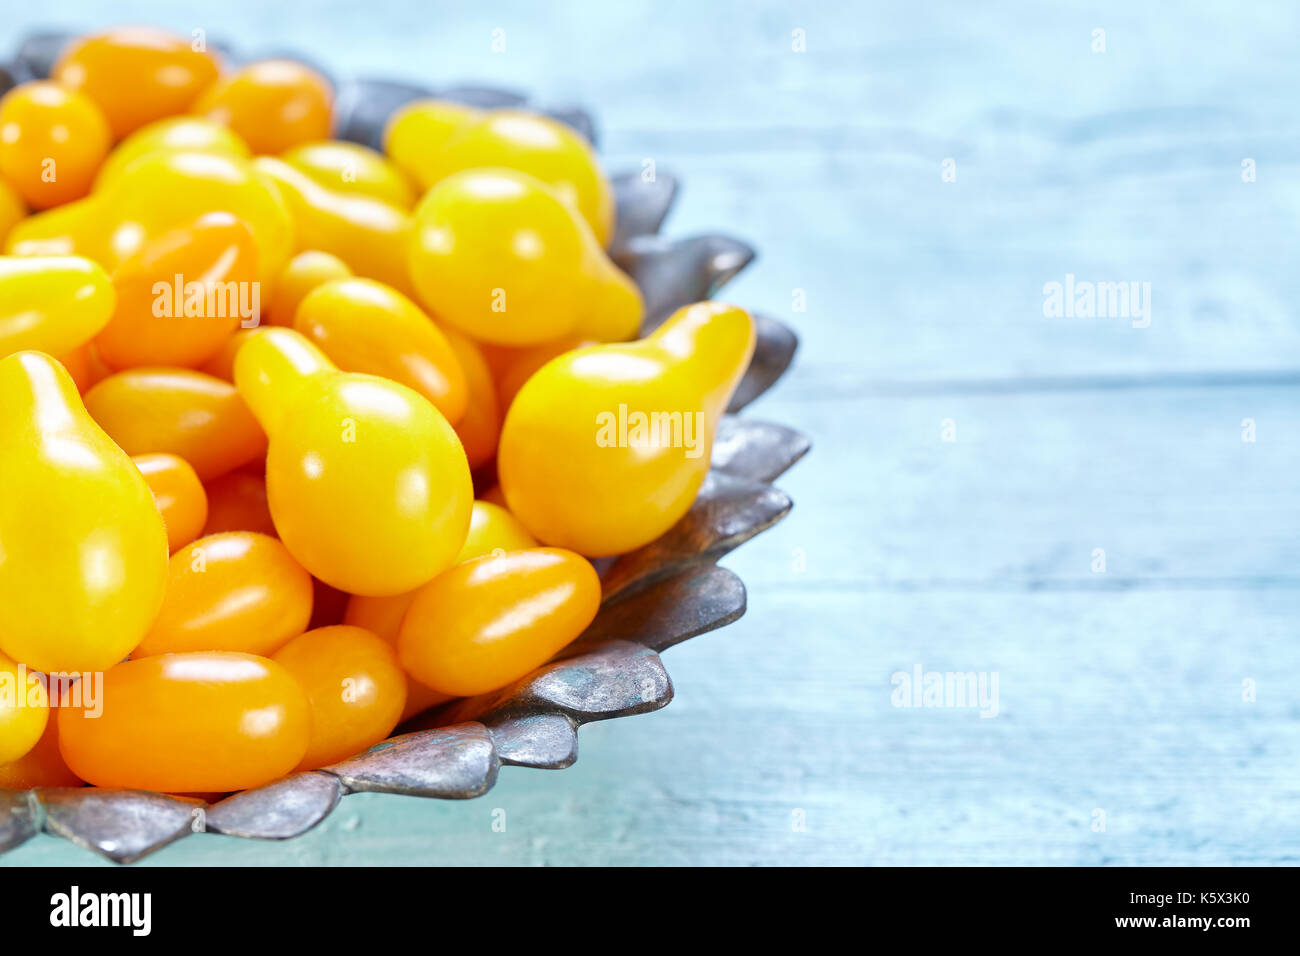 Bowl with mix of yellow pear and datterino heirloom cherry tomatoes on light blue wooden background, photo with copy space. Stock Photo